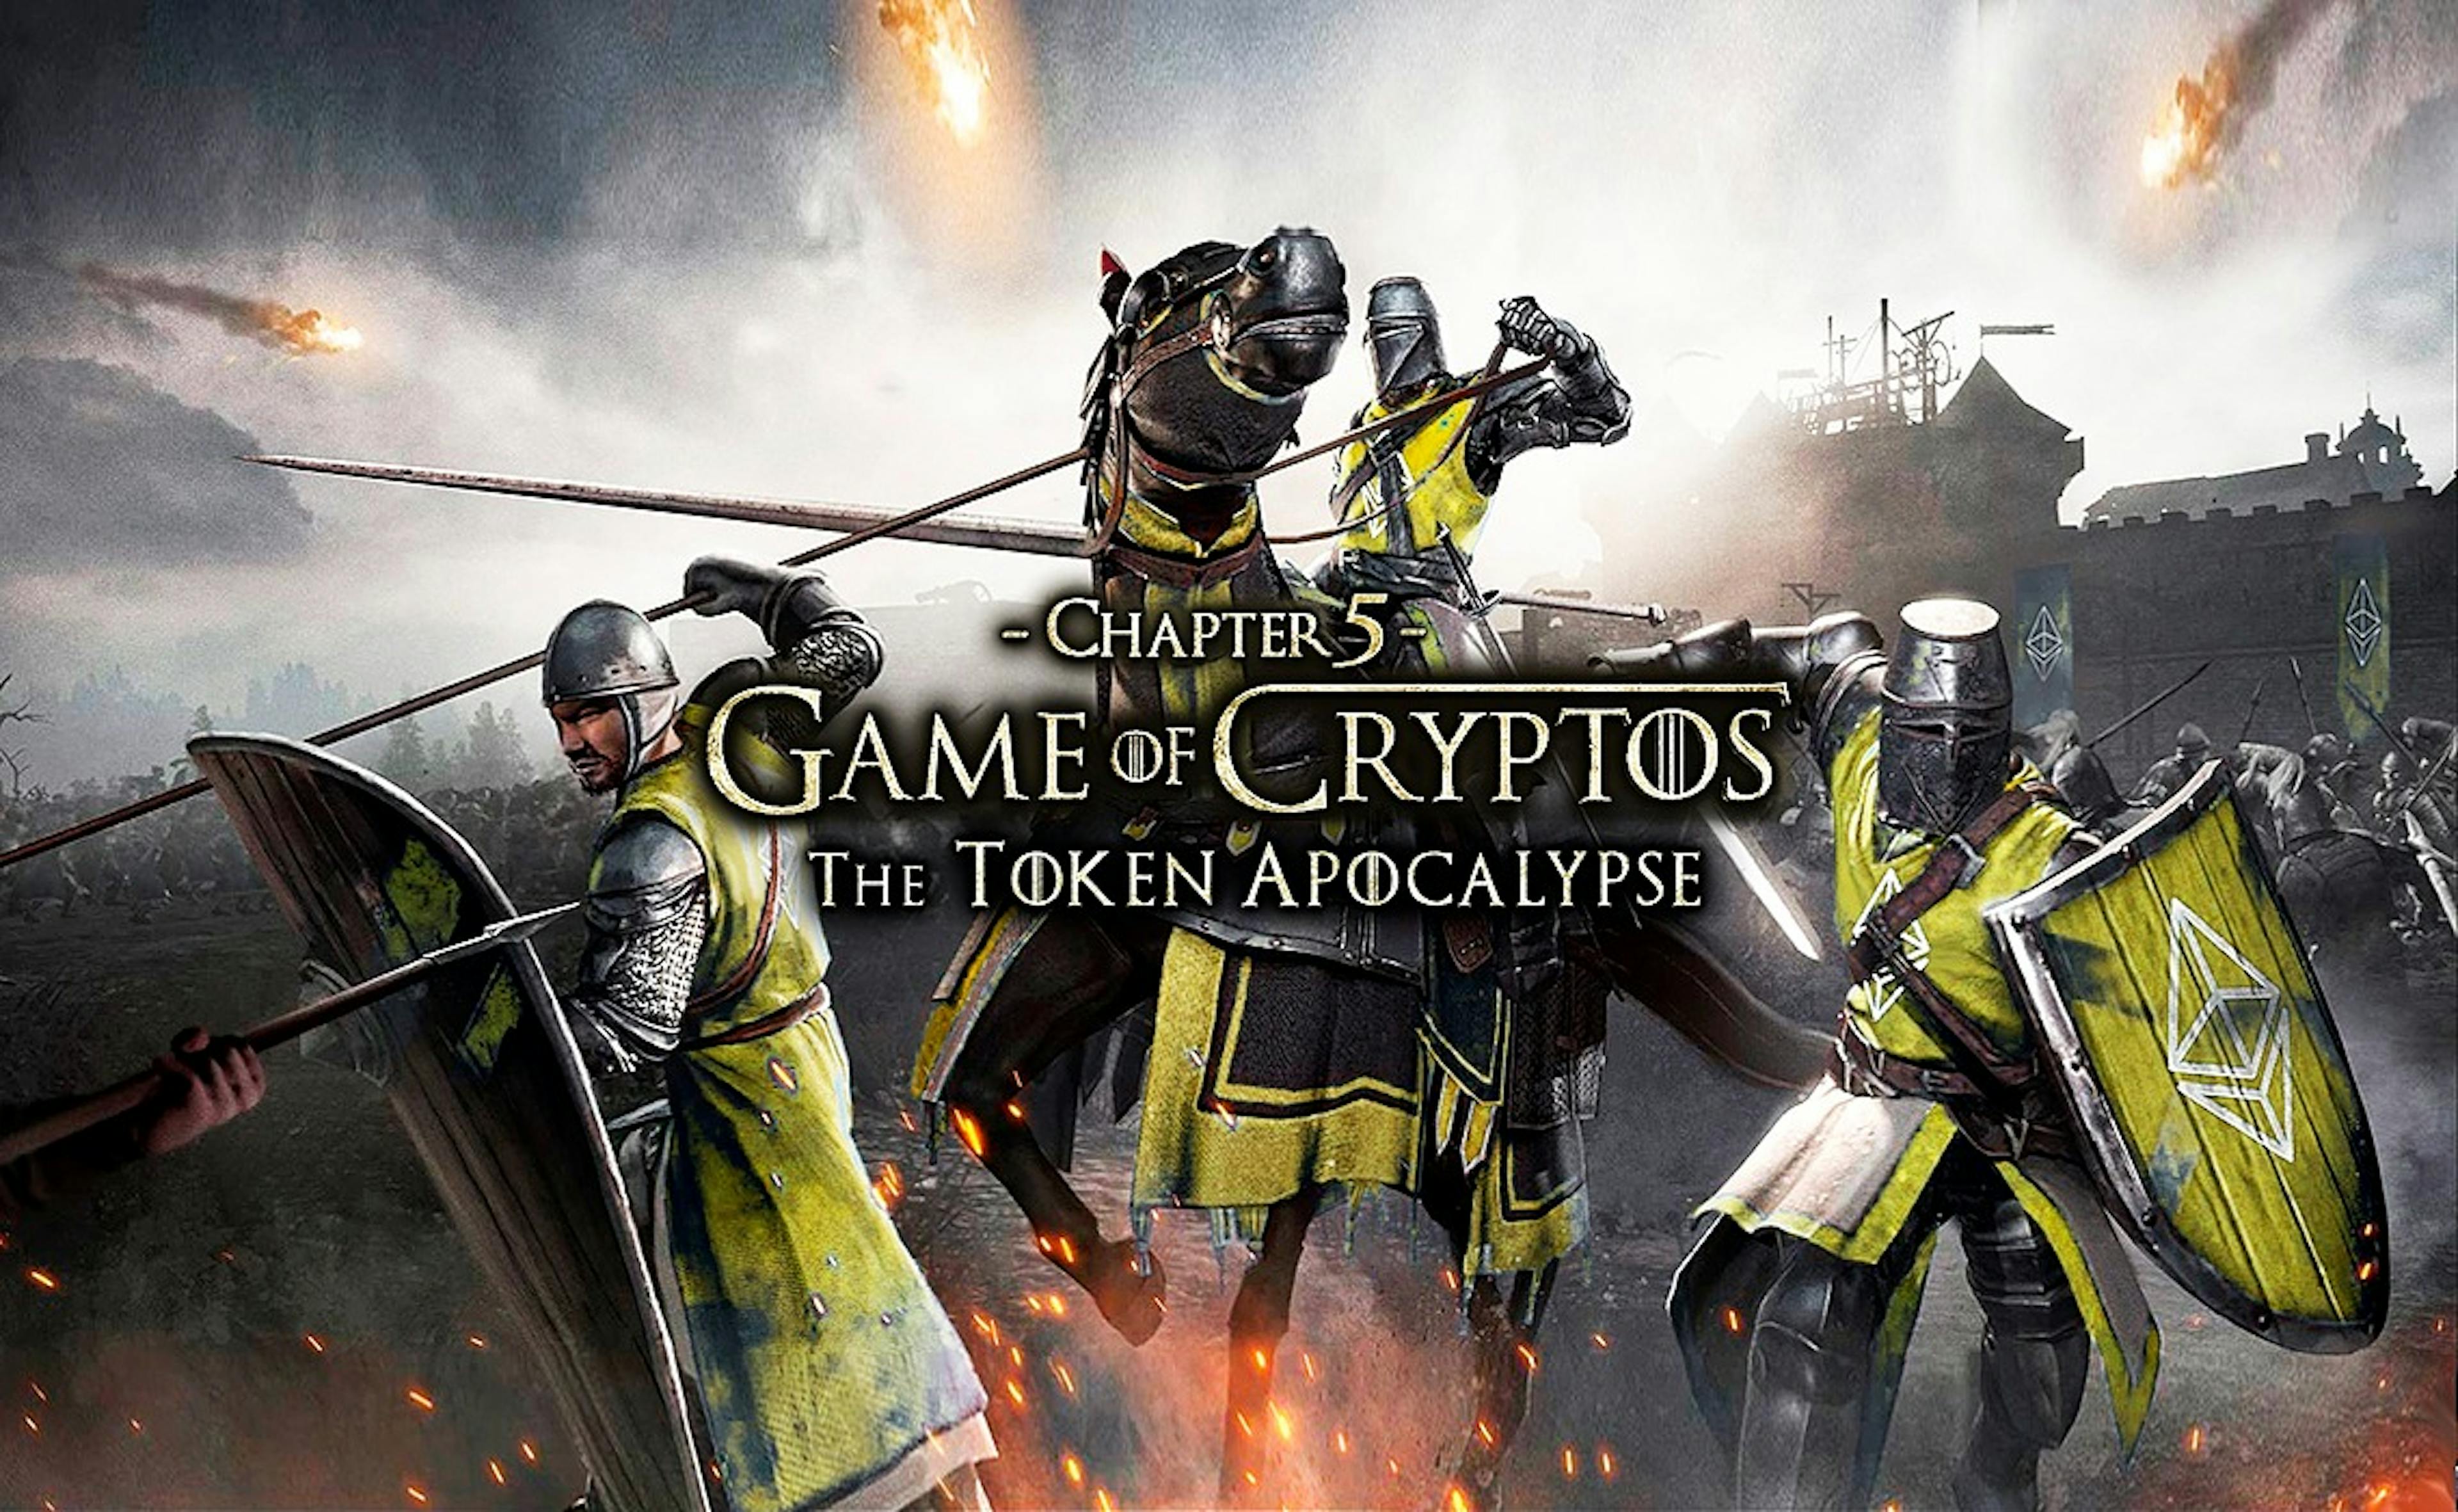 /game-of-cryptos-chapter-5-the-token-apocalypse-xew3zuy feature image